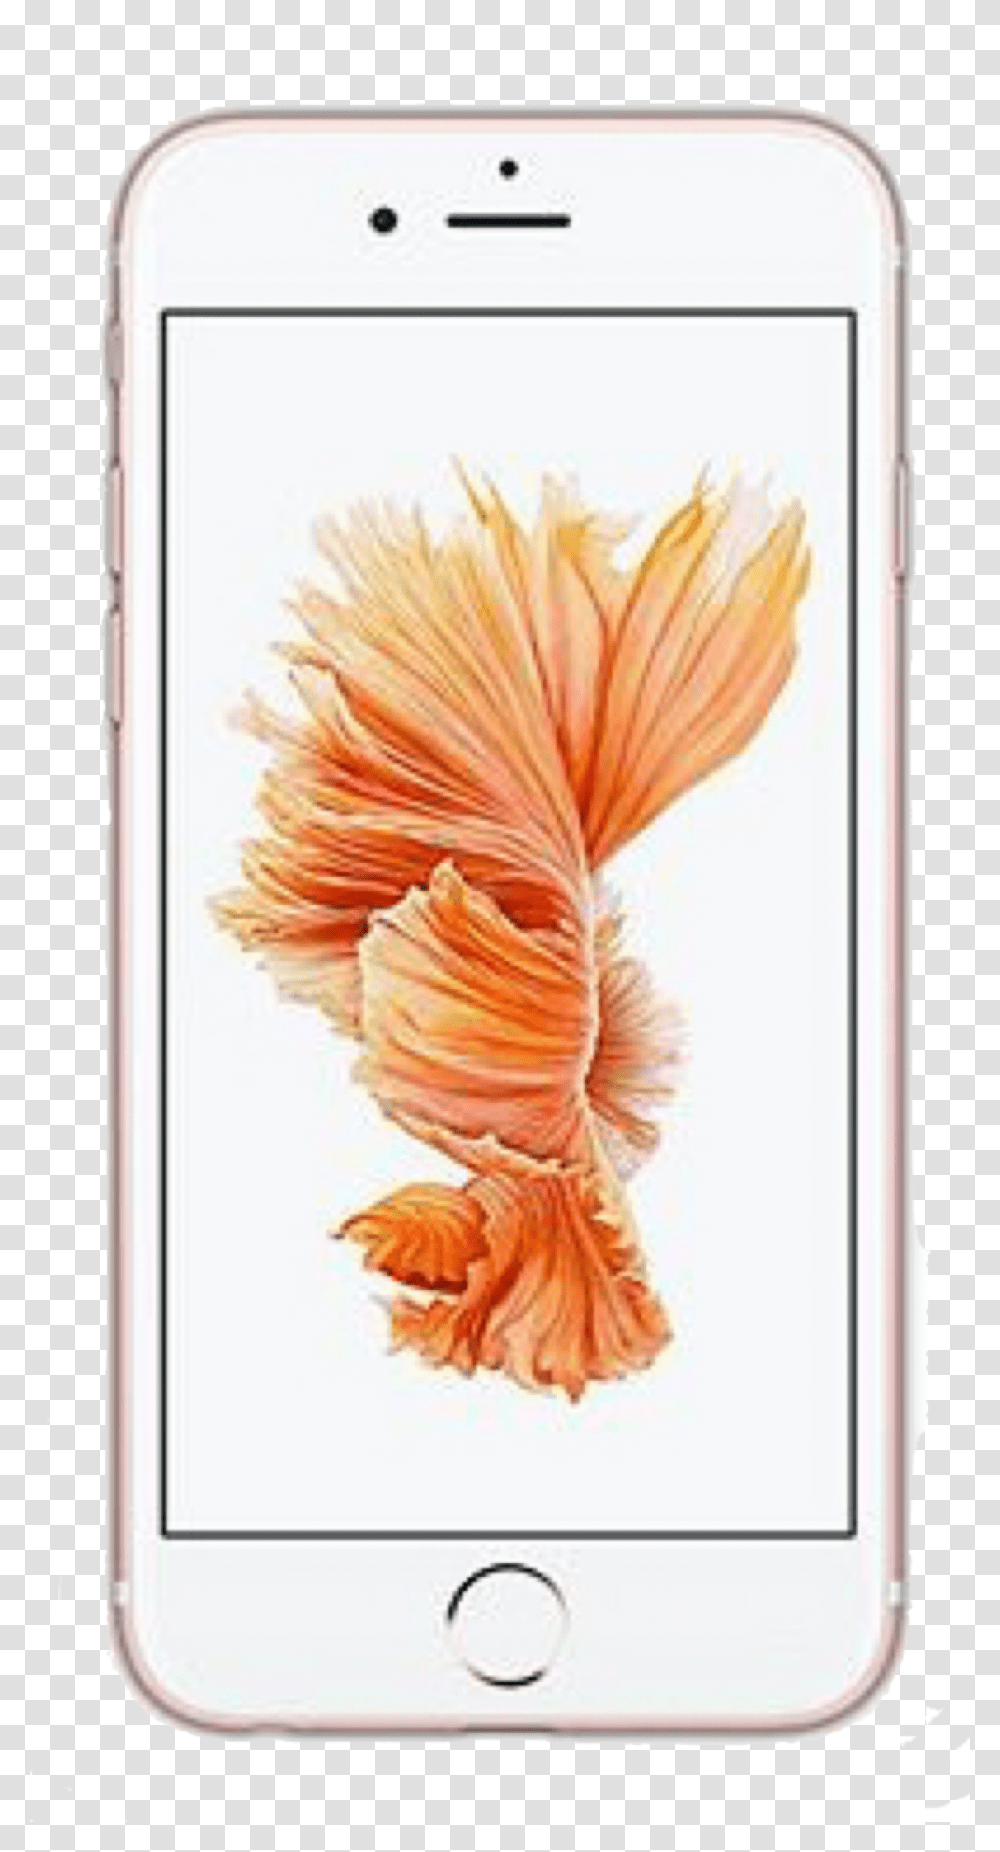 Iphone Iphone6 Iphone7 Apple Phone Trendy Basic Rose Gold Iphone 6 Plus, Electronics, Mobile Phone, Cell Phone Transparent Png